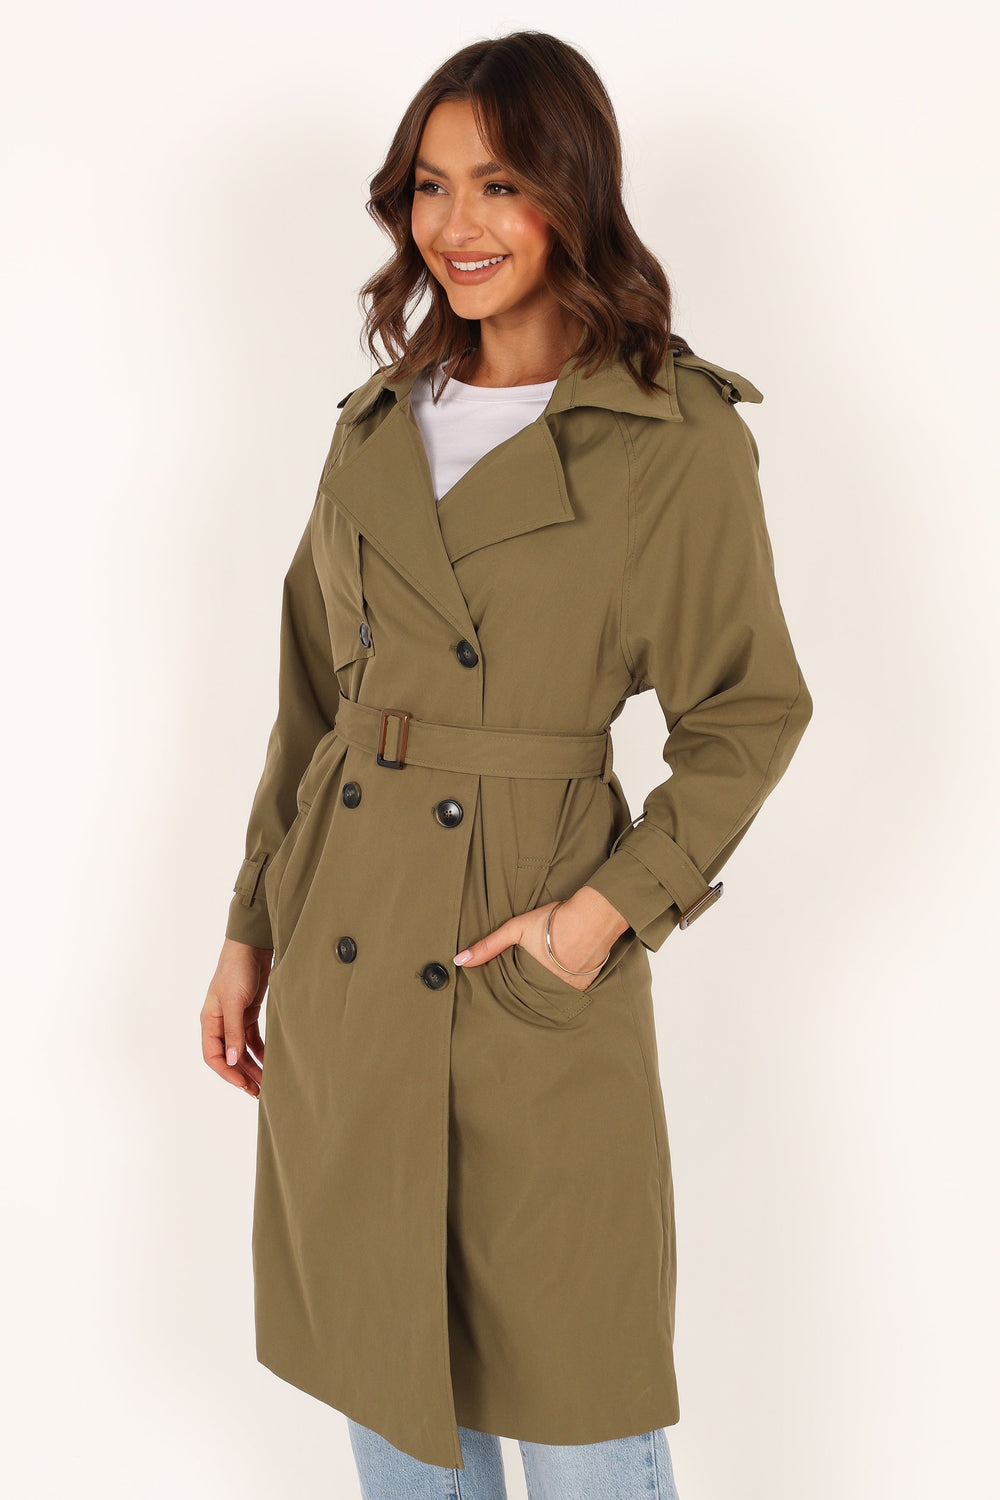 Outerwear @Trina Button Front Trench Coat - Olive